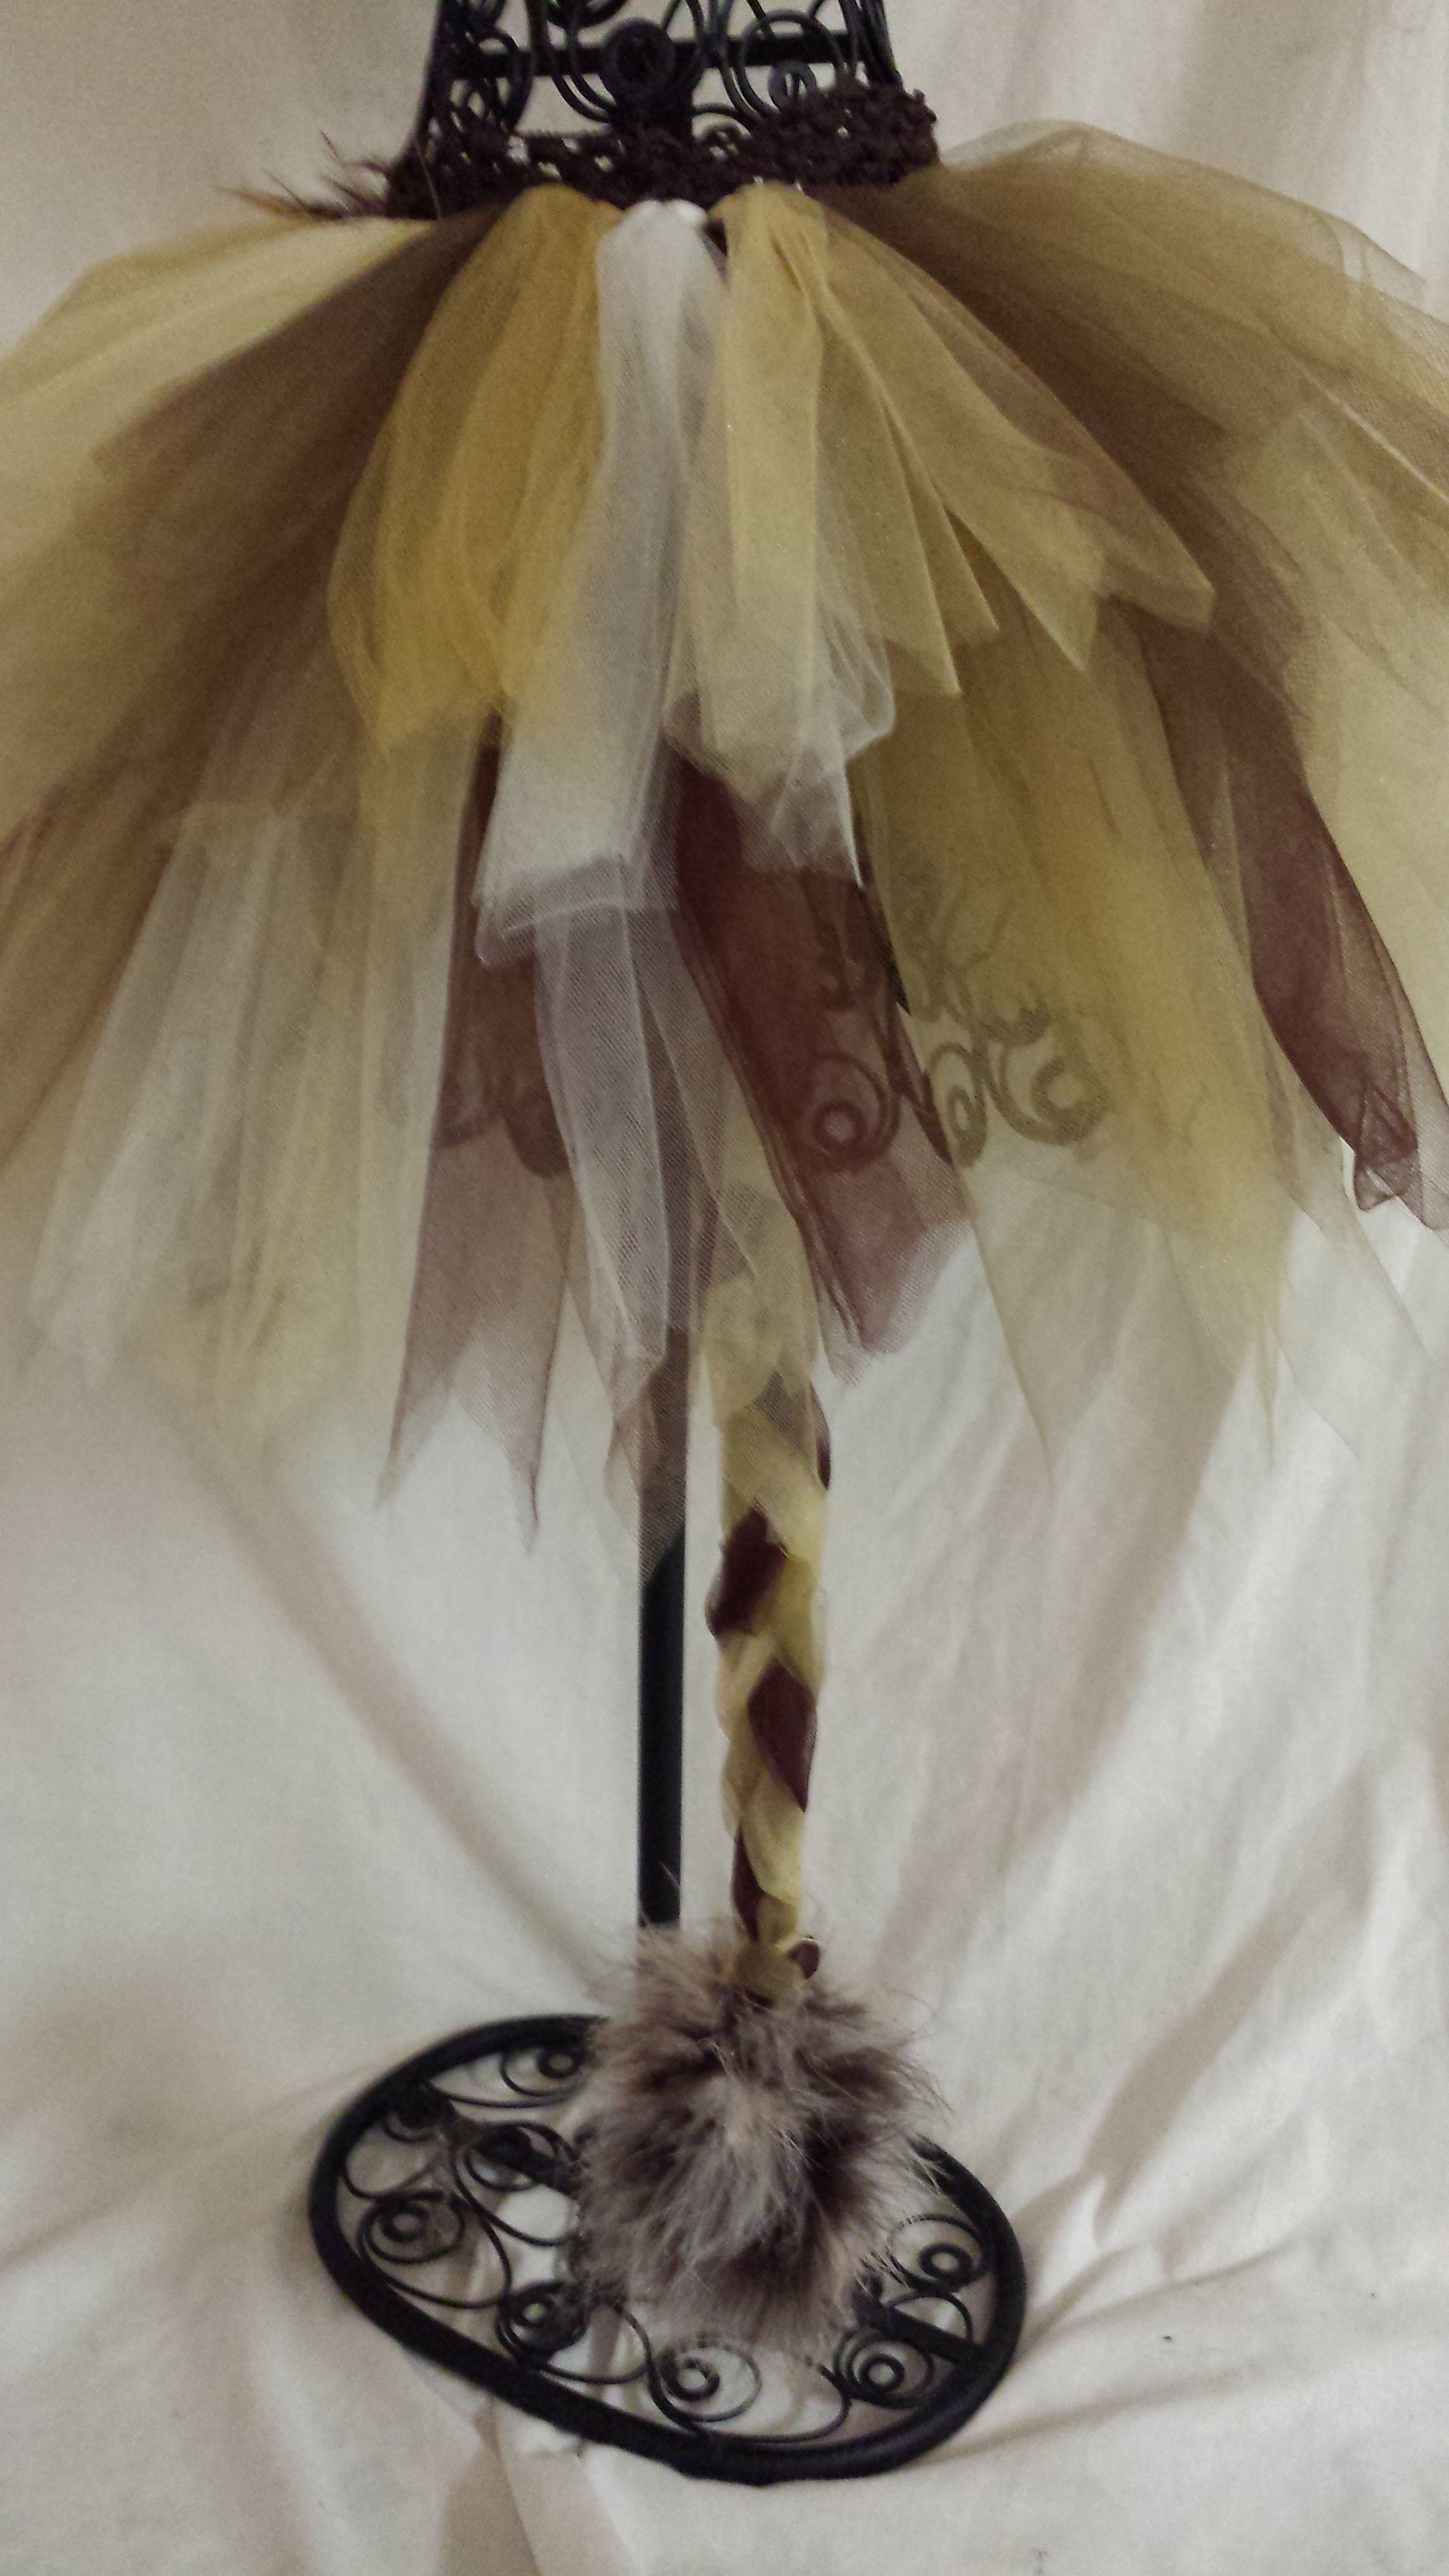 DIY Lion Costume For Adults
 Lion tutu costume available at etsy shop 2tutucute